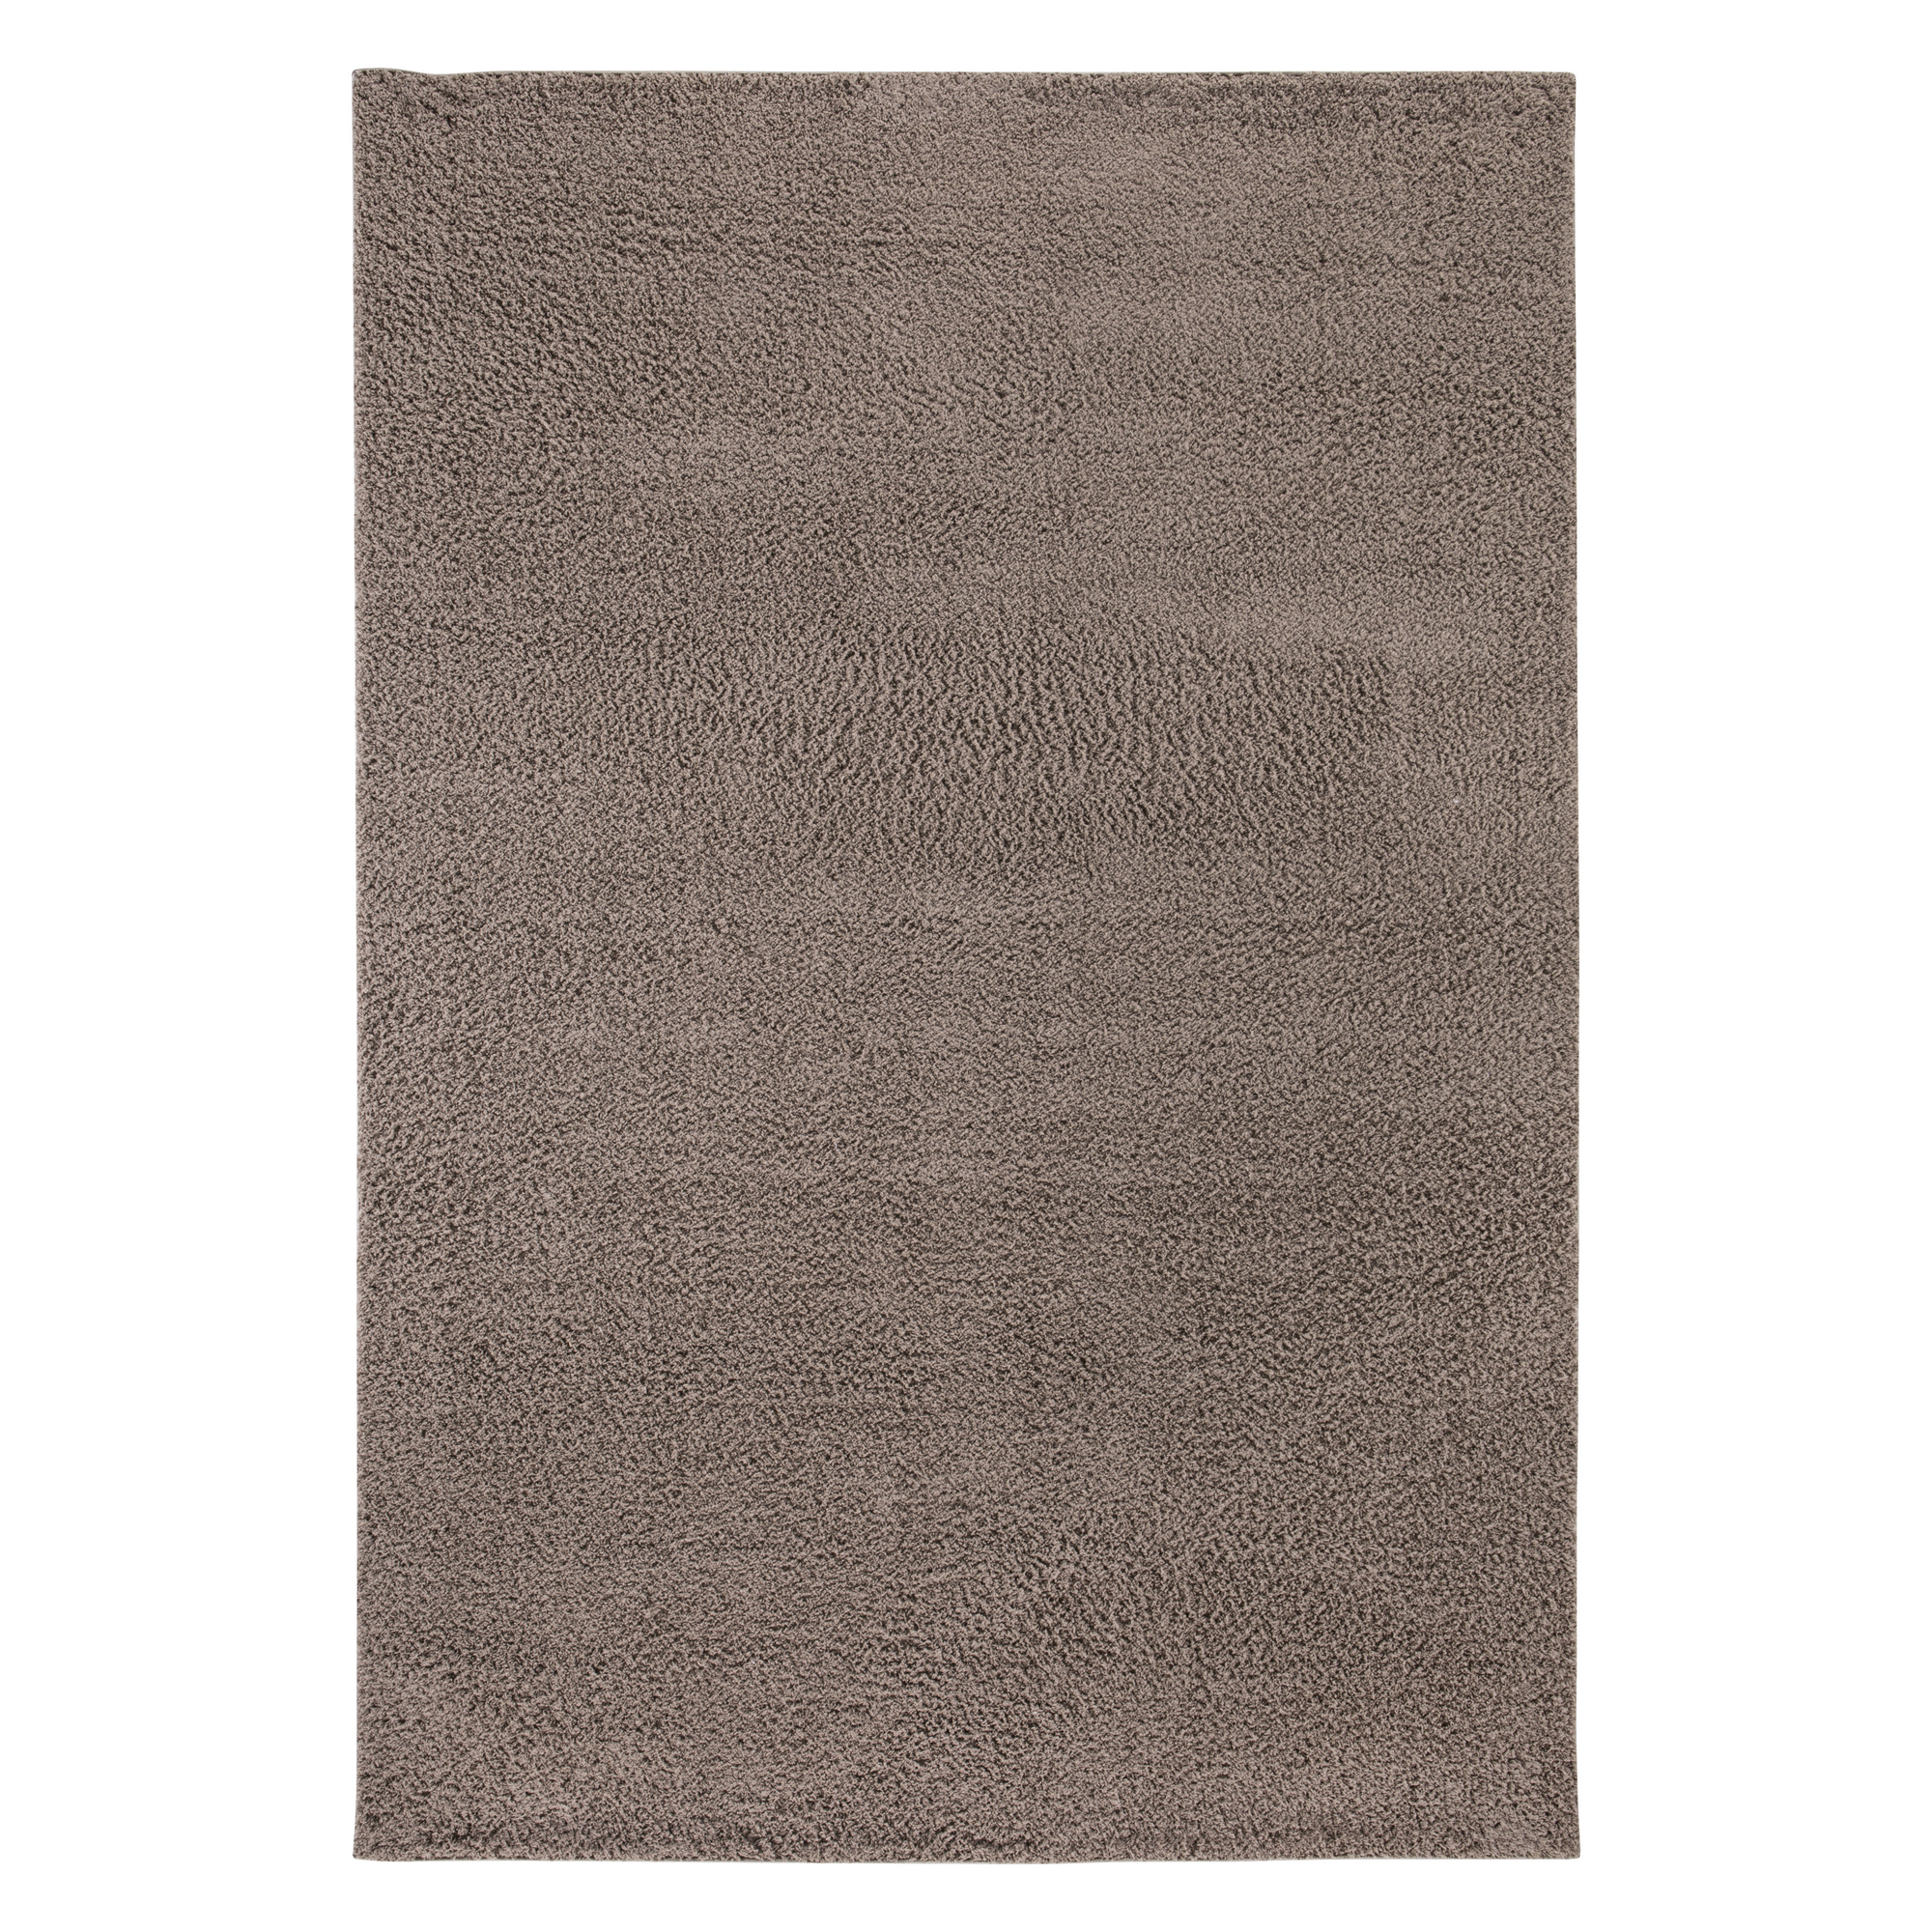 Teppich 'Cala Bona' taupe 57 x 110 cm + product picture